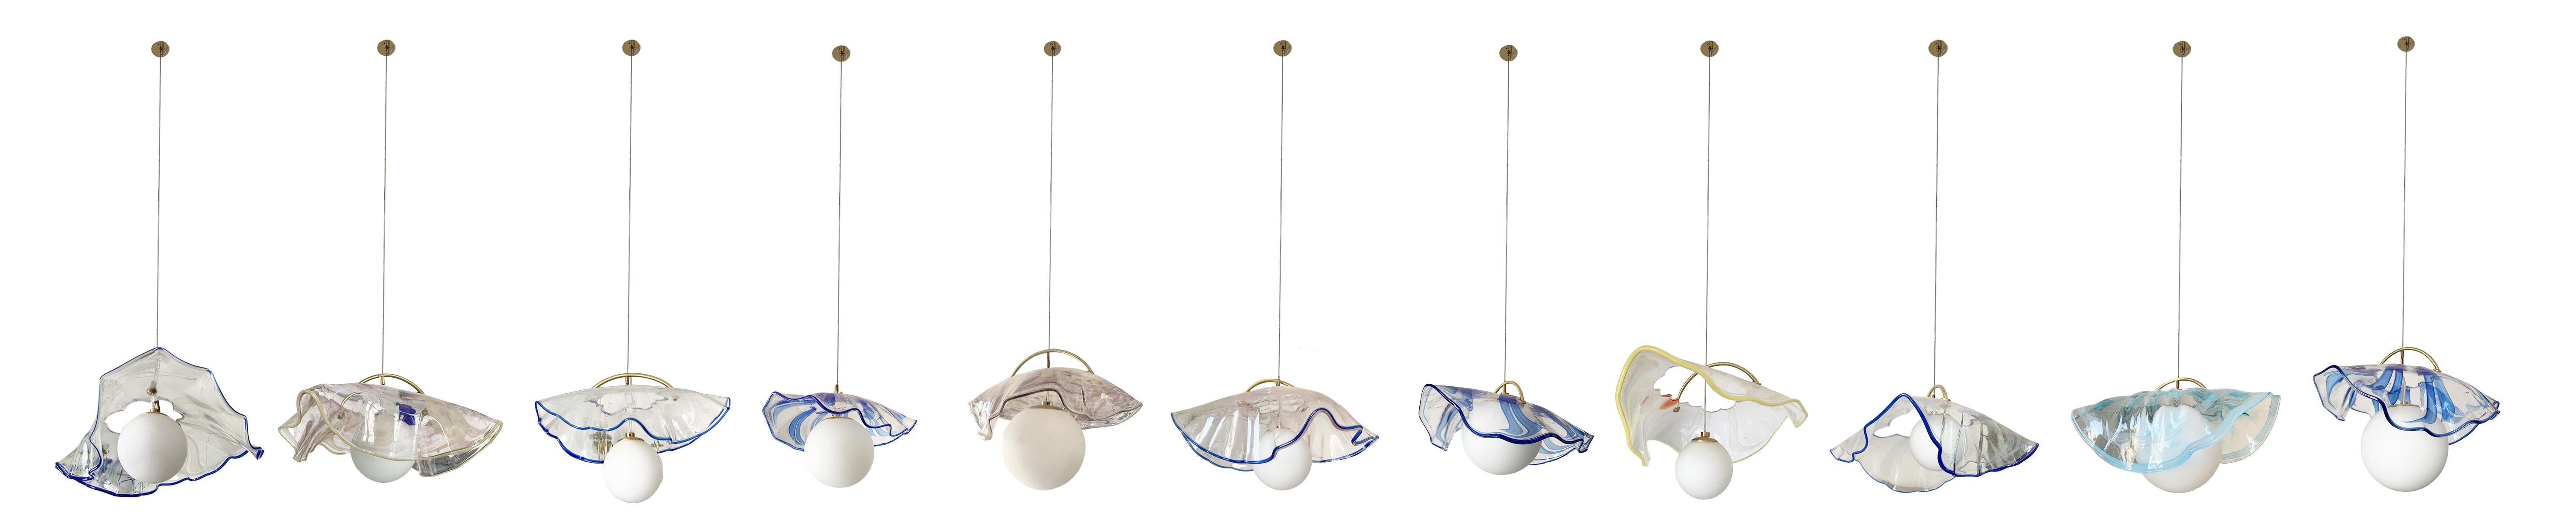 jellyfish pendant lamp by Sema Topaloglu

jellyfish lamps are a collection, the price is for only 1 item.

This product is hand-crafted therefore each production is unique and might not be exactly the same as the visual.

Sema Topaloglu Studio